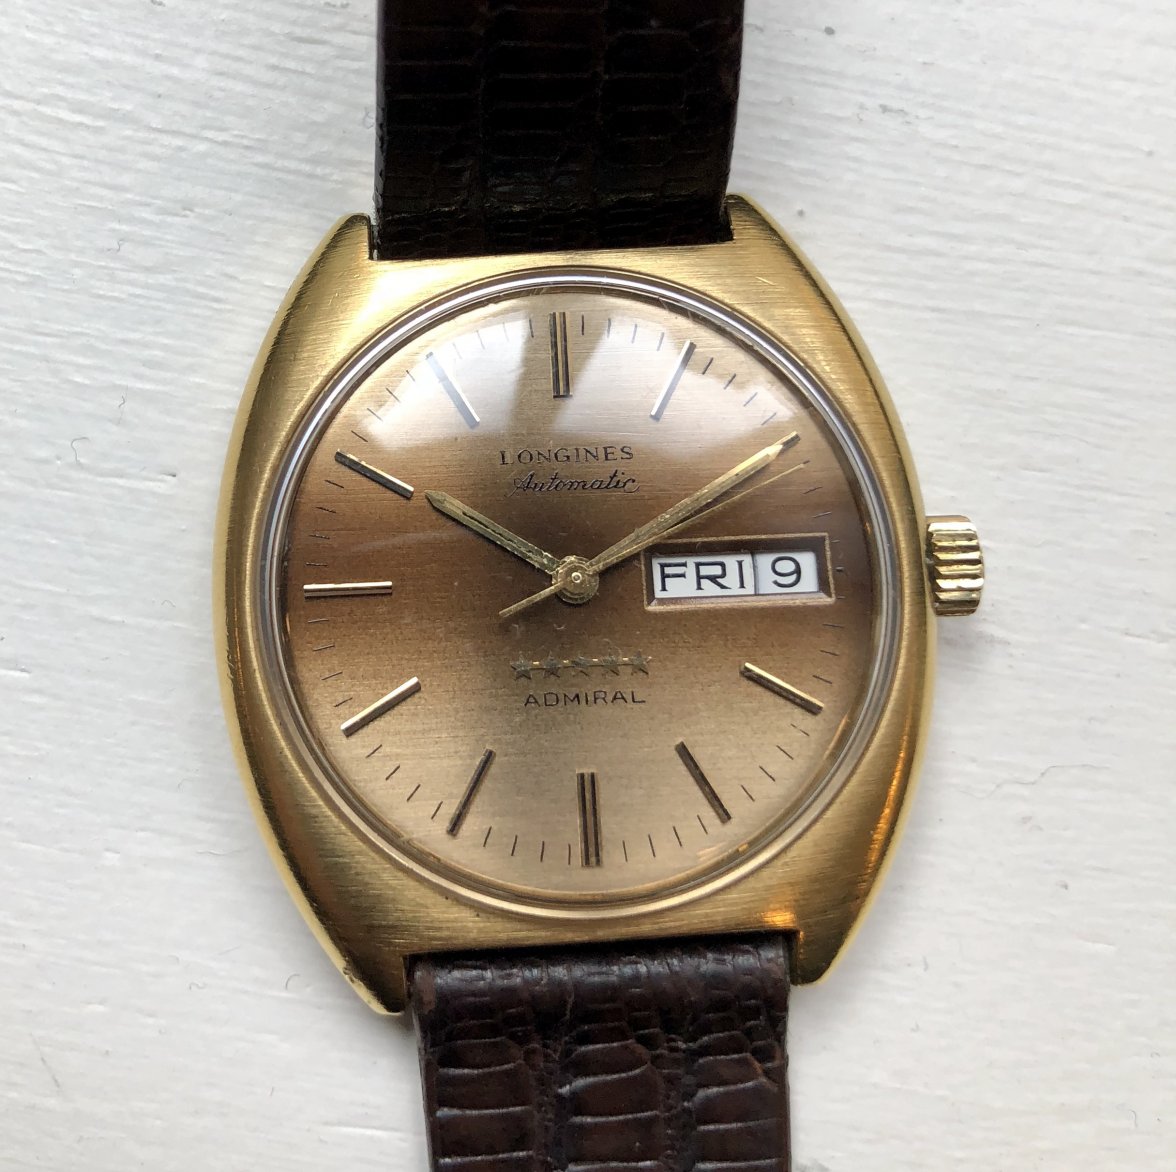 SOLD - Longines Admiral 5 Star - Automatic | Omega Forums